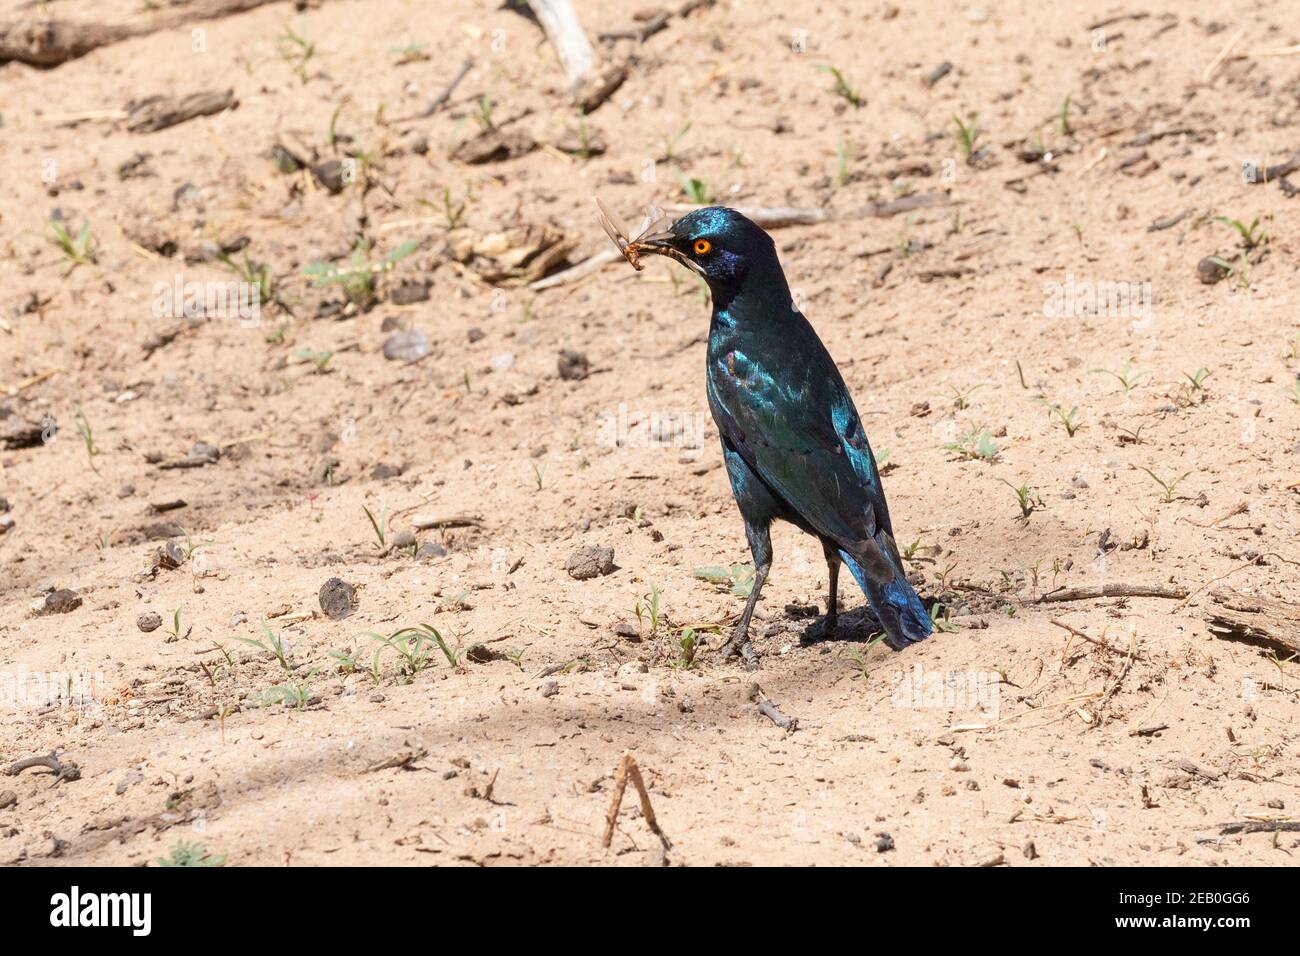 Cape Glossy Starling (Lamprotornis nitens) alias Red-épauled Glossy Starling fouring avec une proie d'insecte, Kgalagadi Transfronder Park, Afrique du Sud Banque D'Images